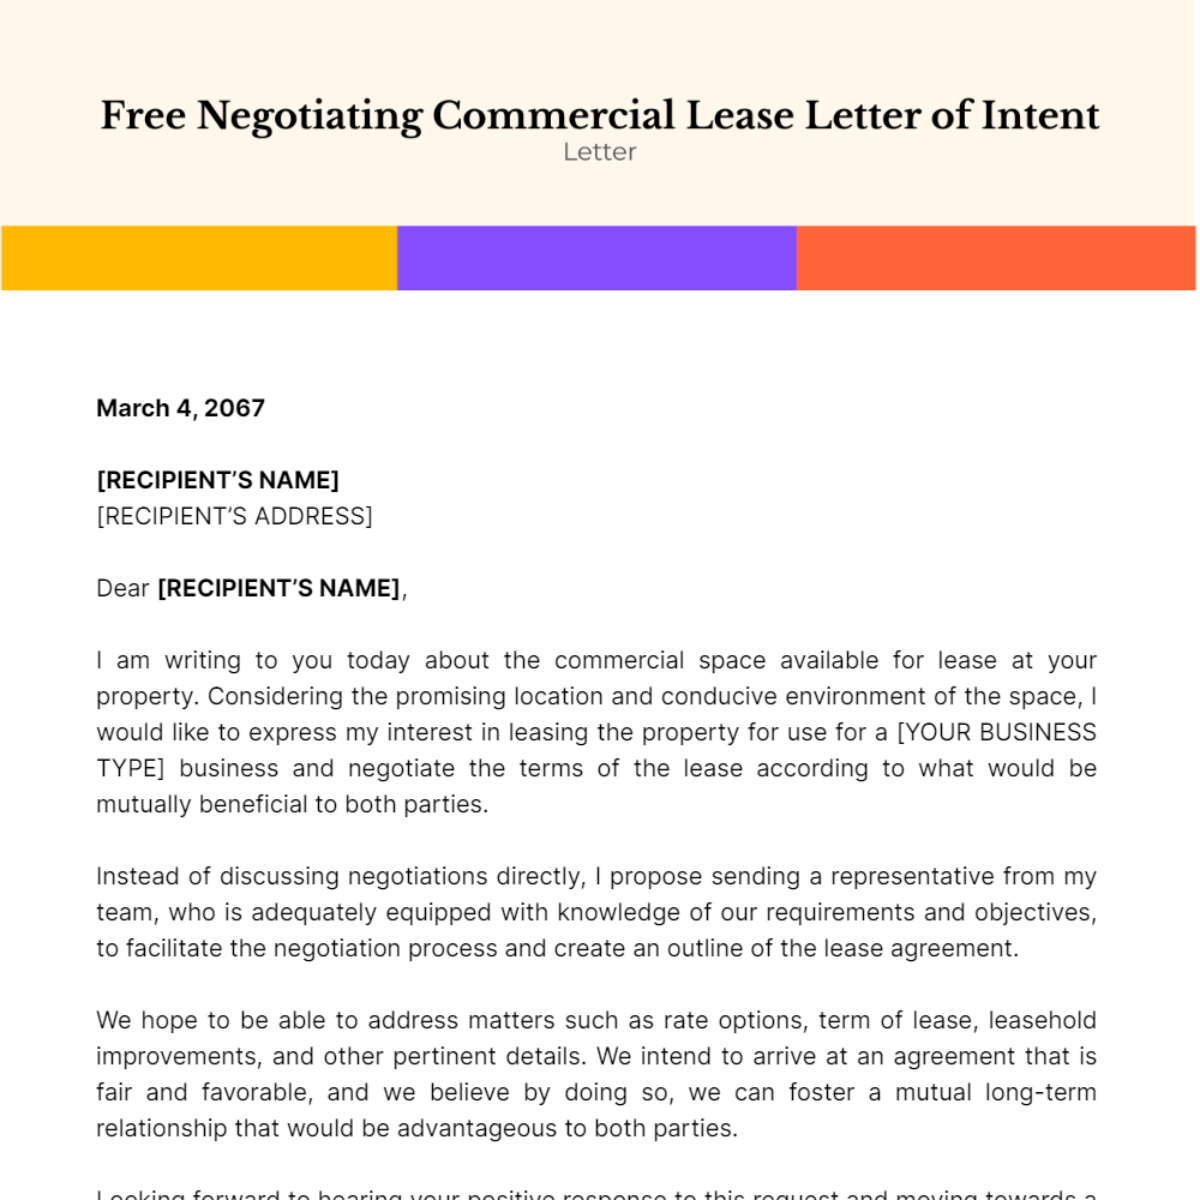 Negotiating Commercial Lease Letter of Intent Template